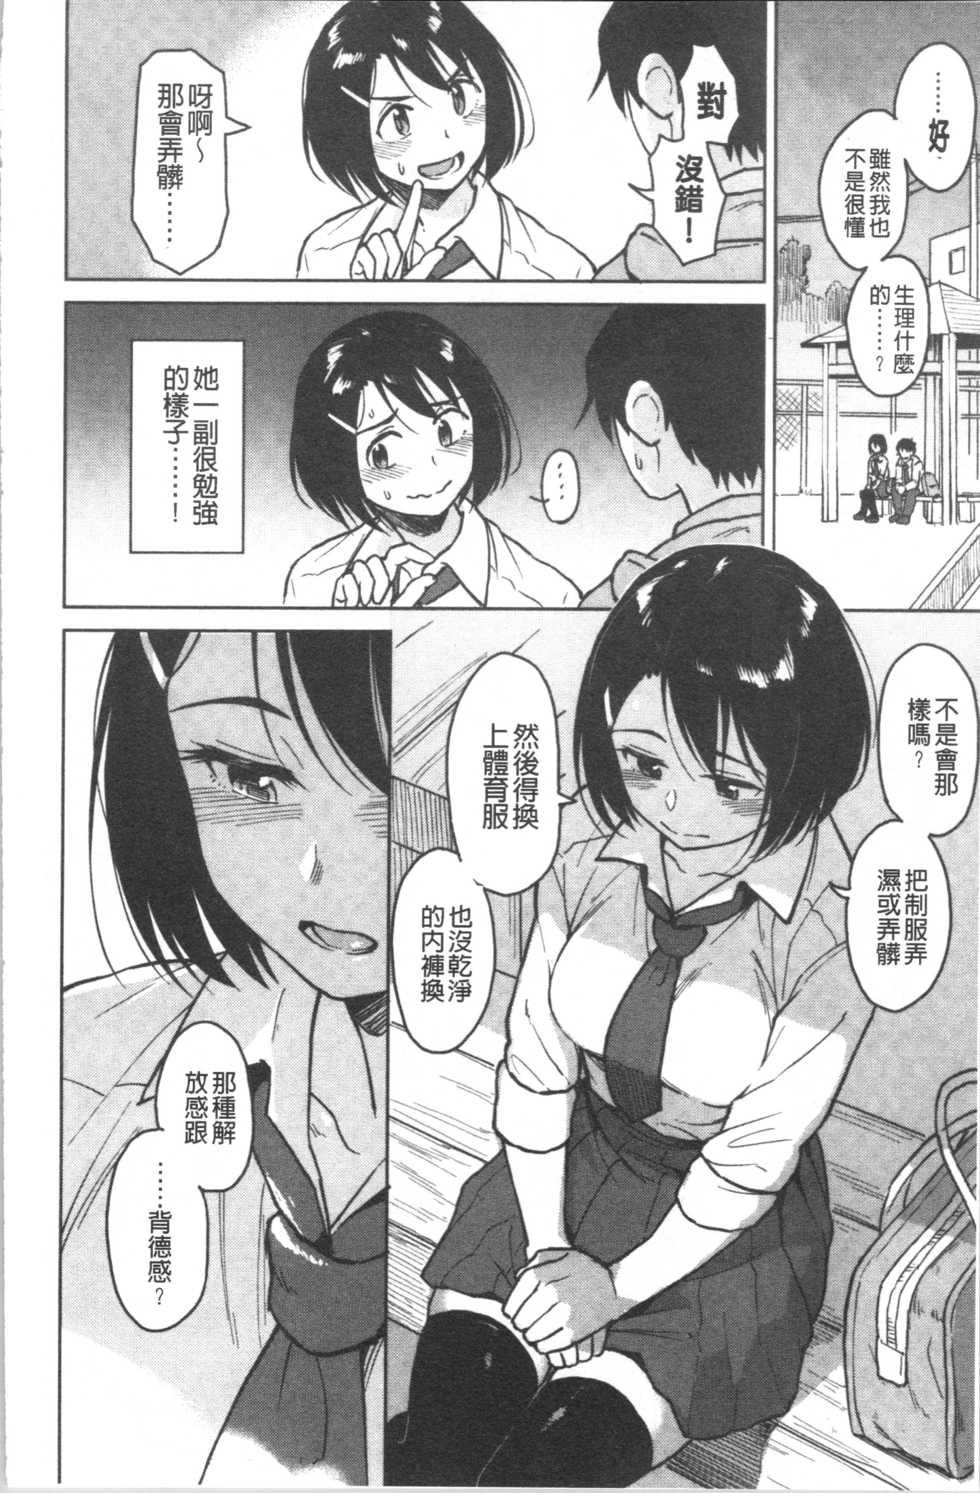 [Pennel] Houkago wa Bouken no Jikan - Time for libido after school [Chinese] - Page 30